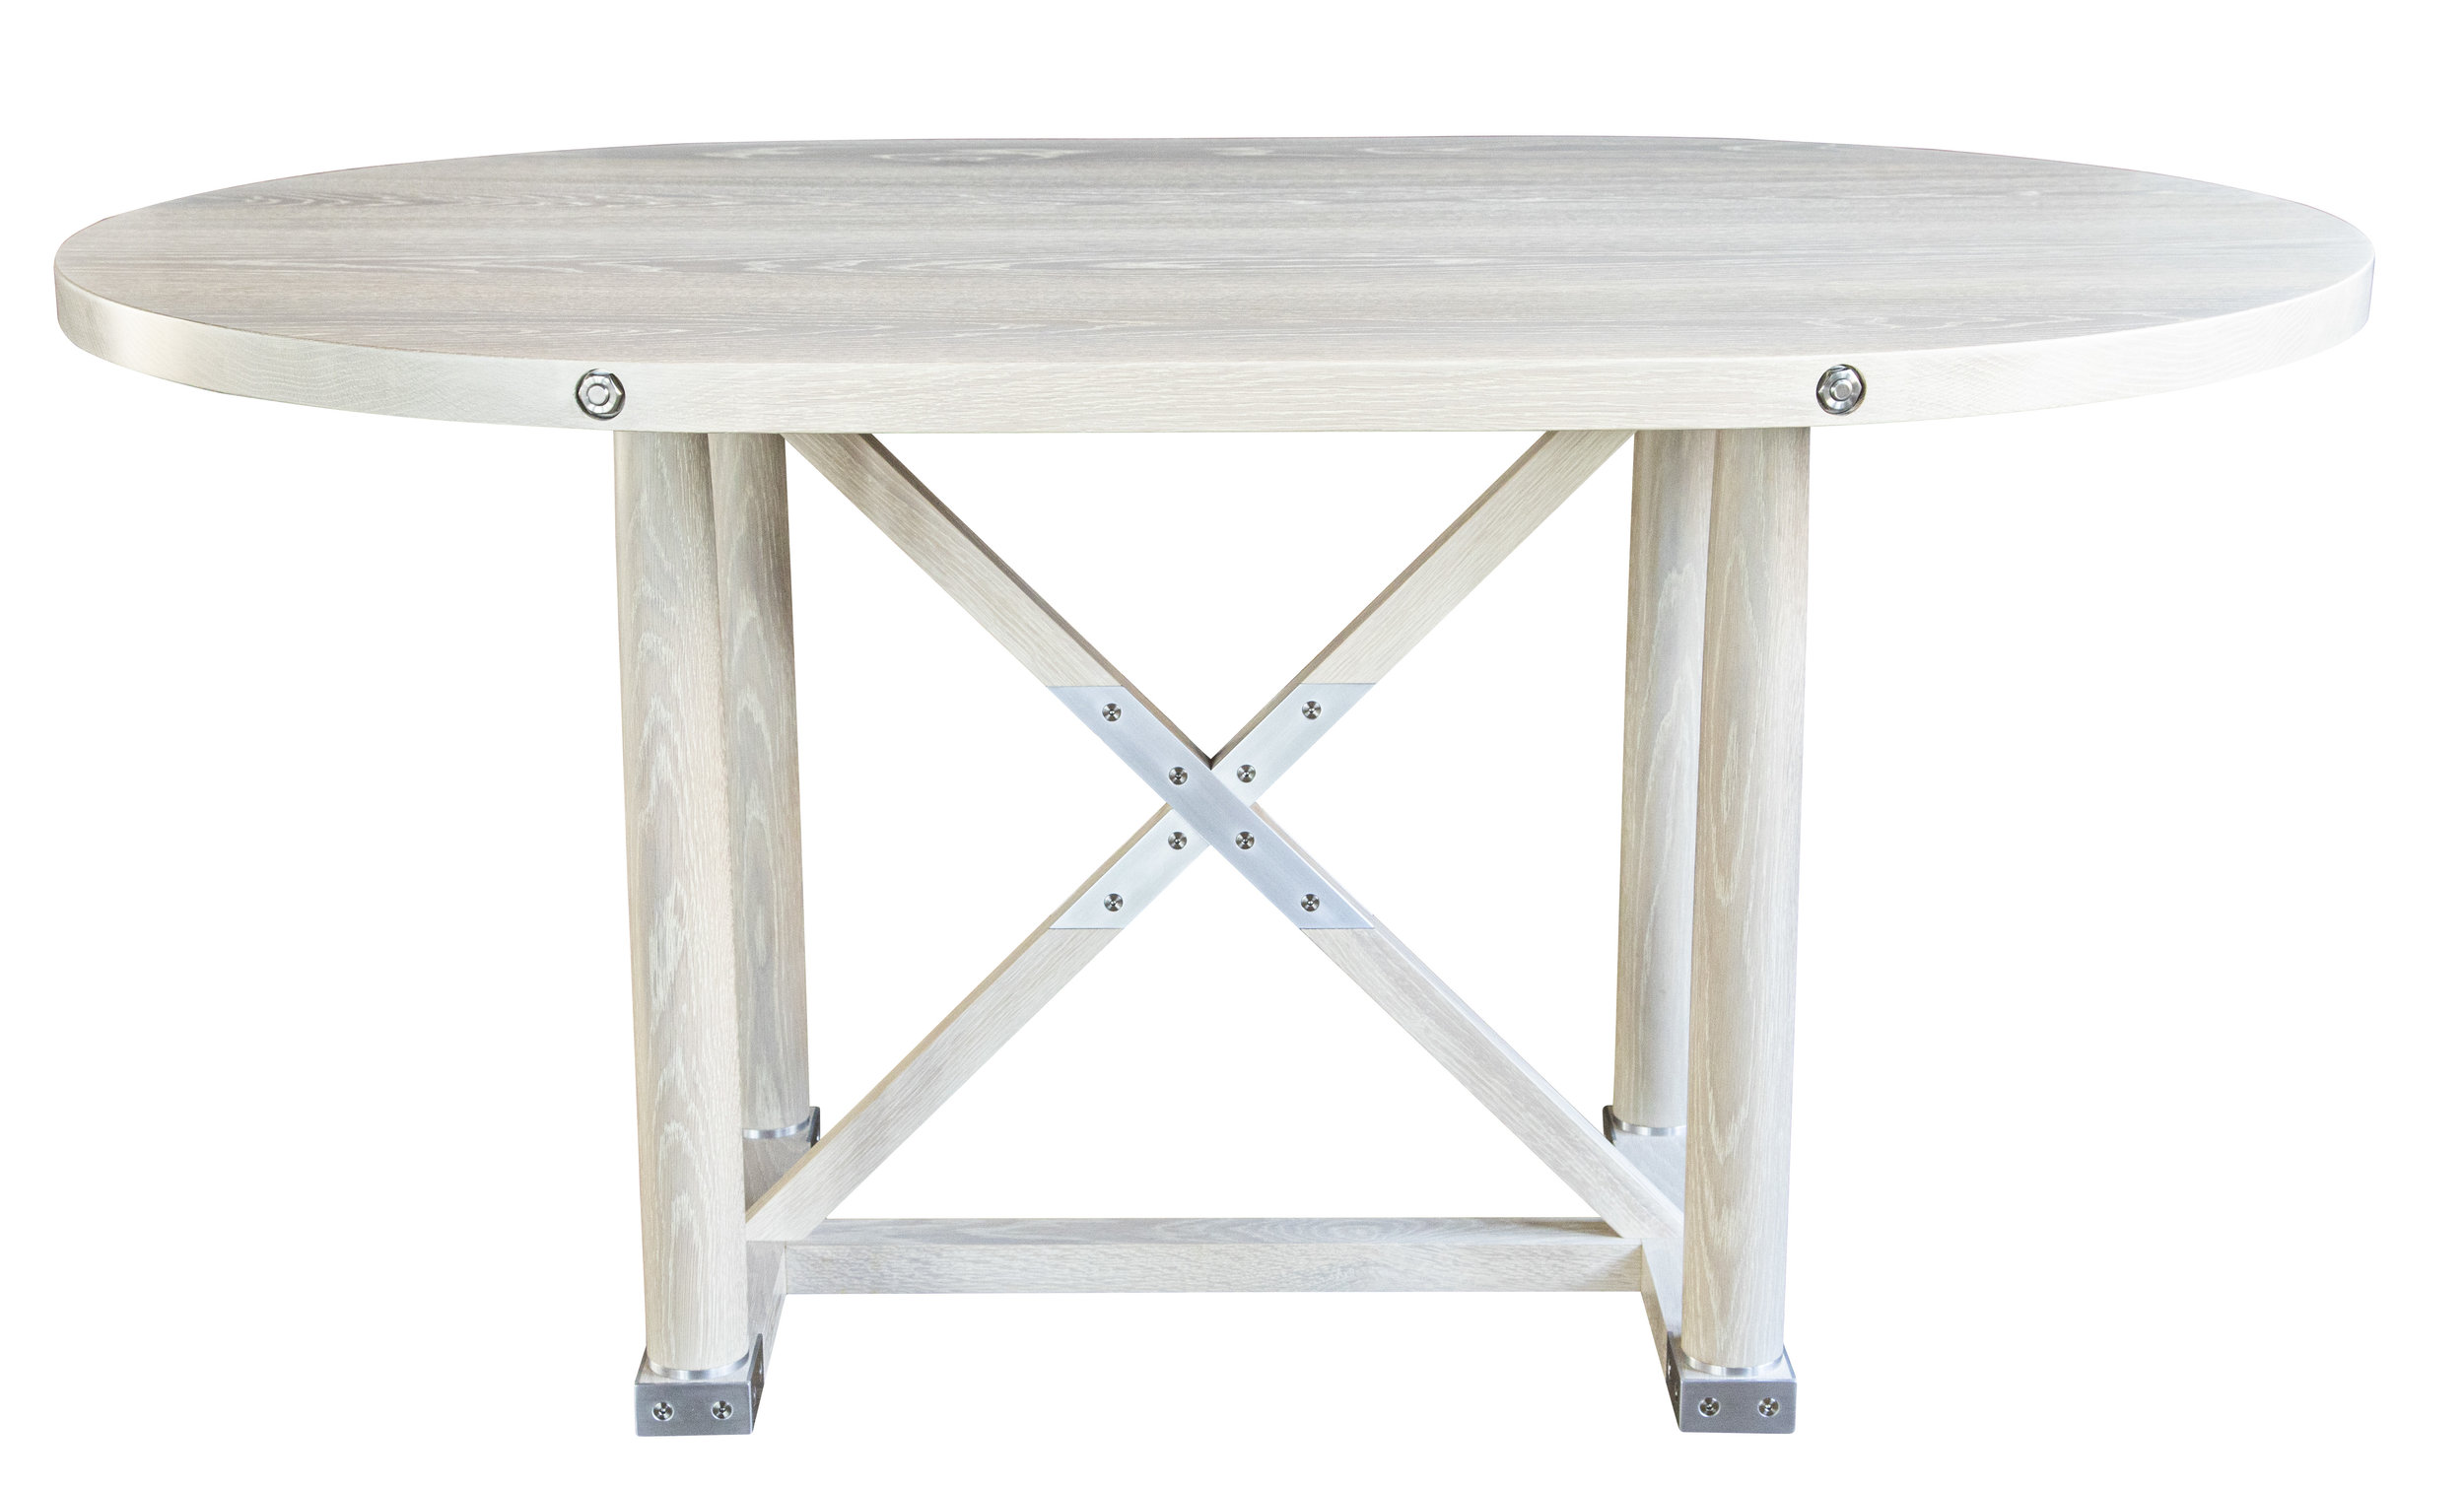 Carden Dining Table - Racetrack Top